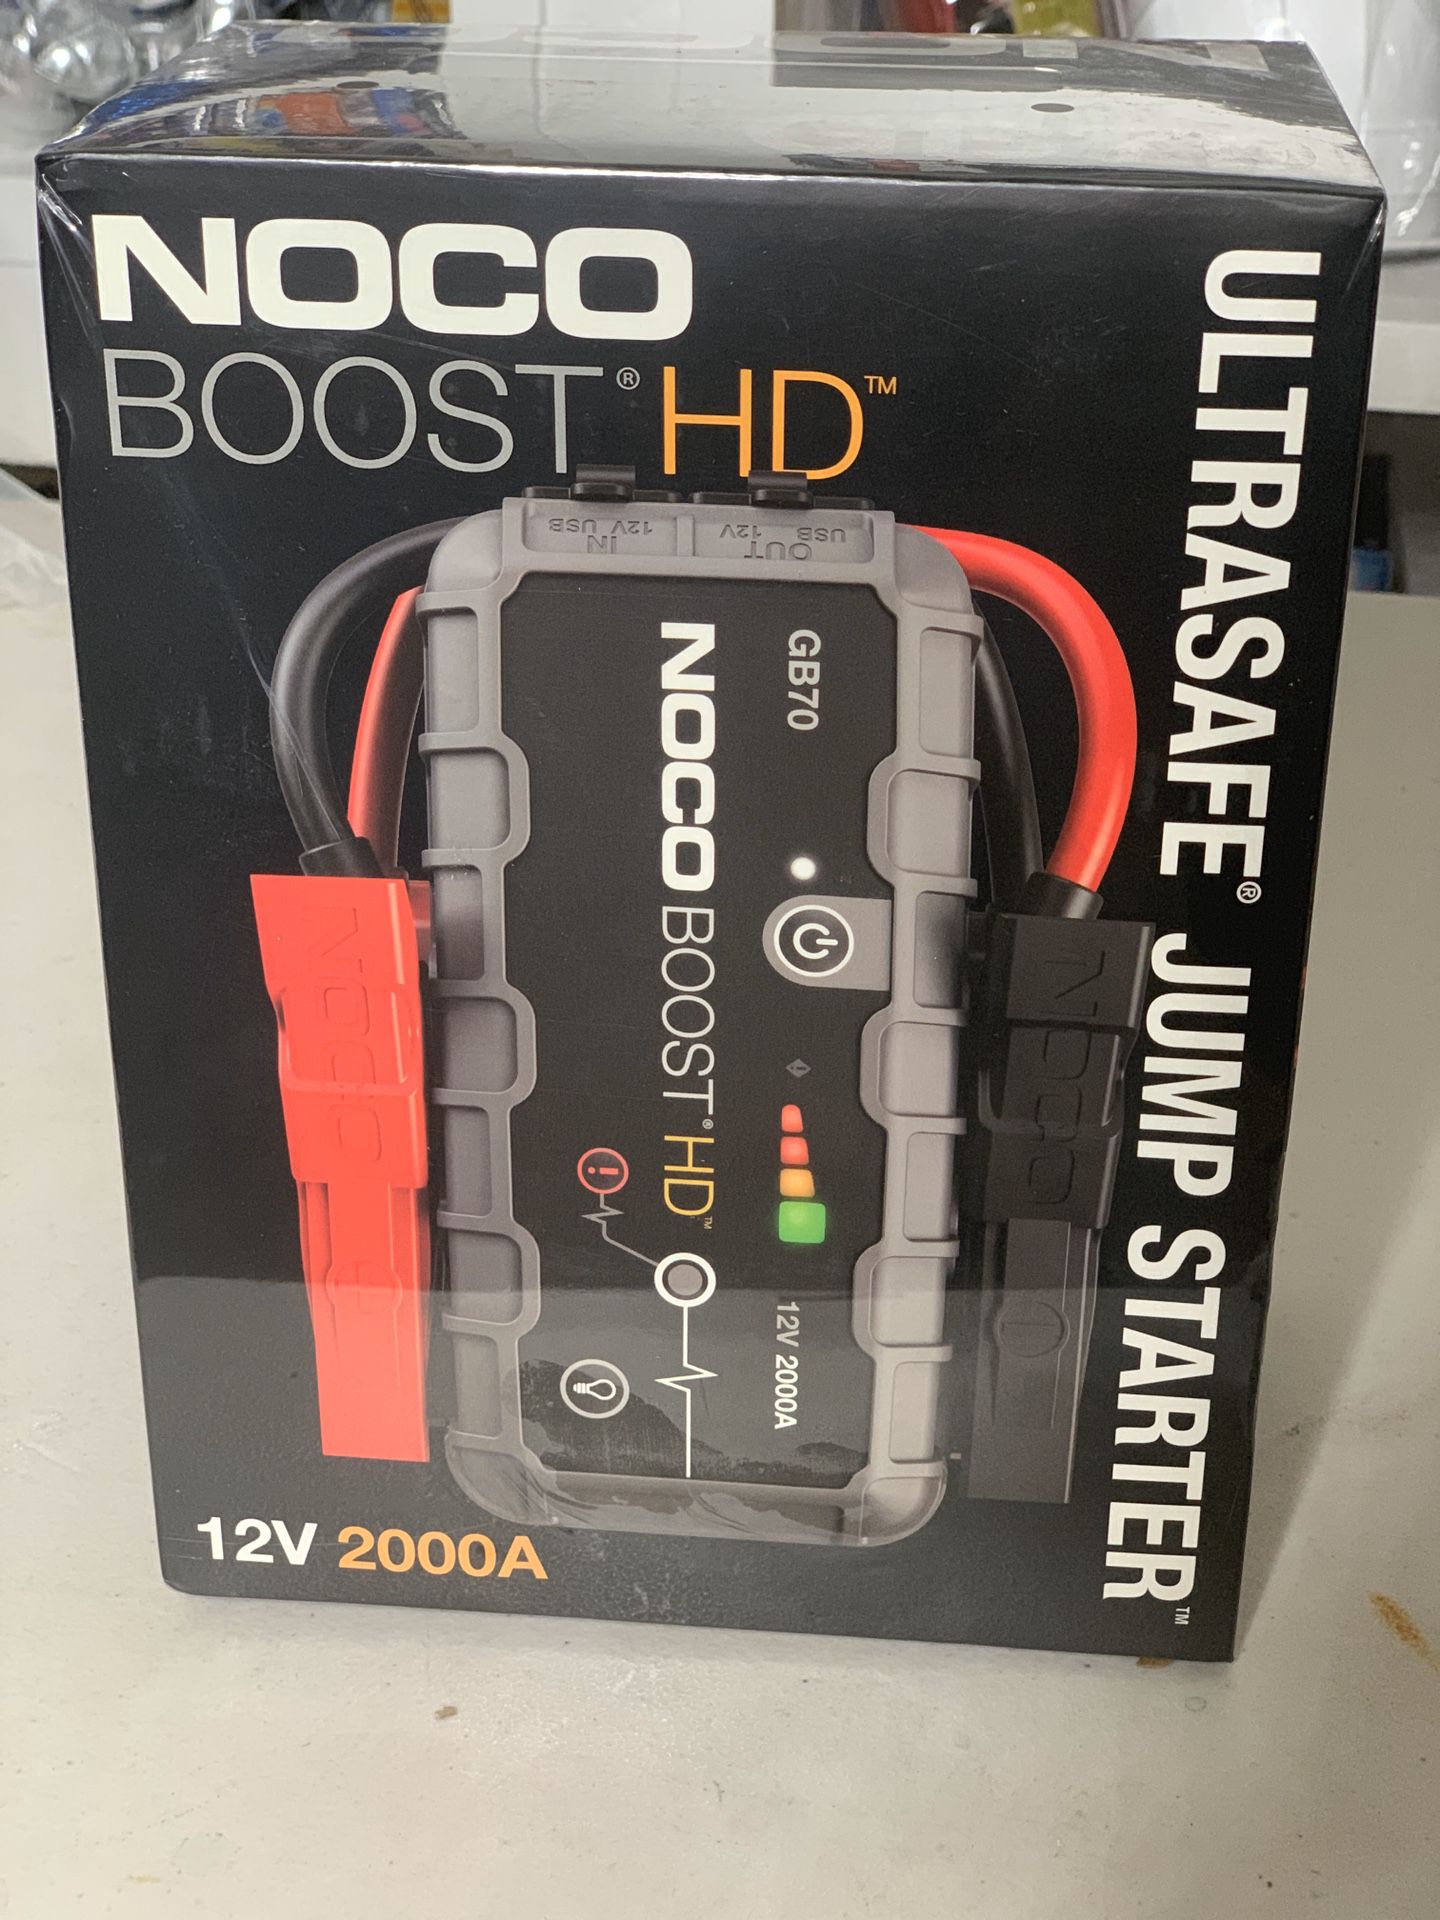 NOCO Boost HD GB70 2000 Amp 12-Volt UltraSafe Portable Lithium Car Battery Jump Starter Pack For Up To 8-Liter Gasoline And 6-Liter Diesel Engines